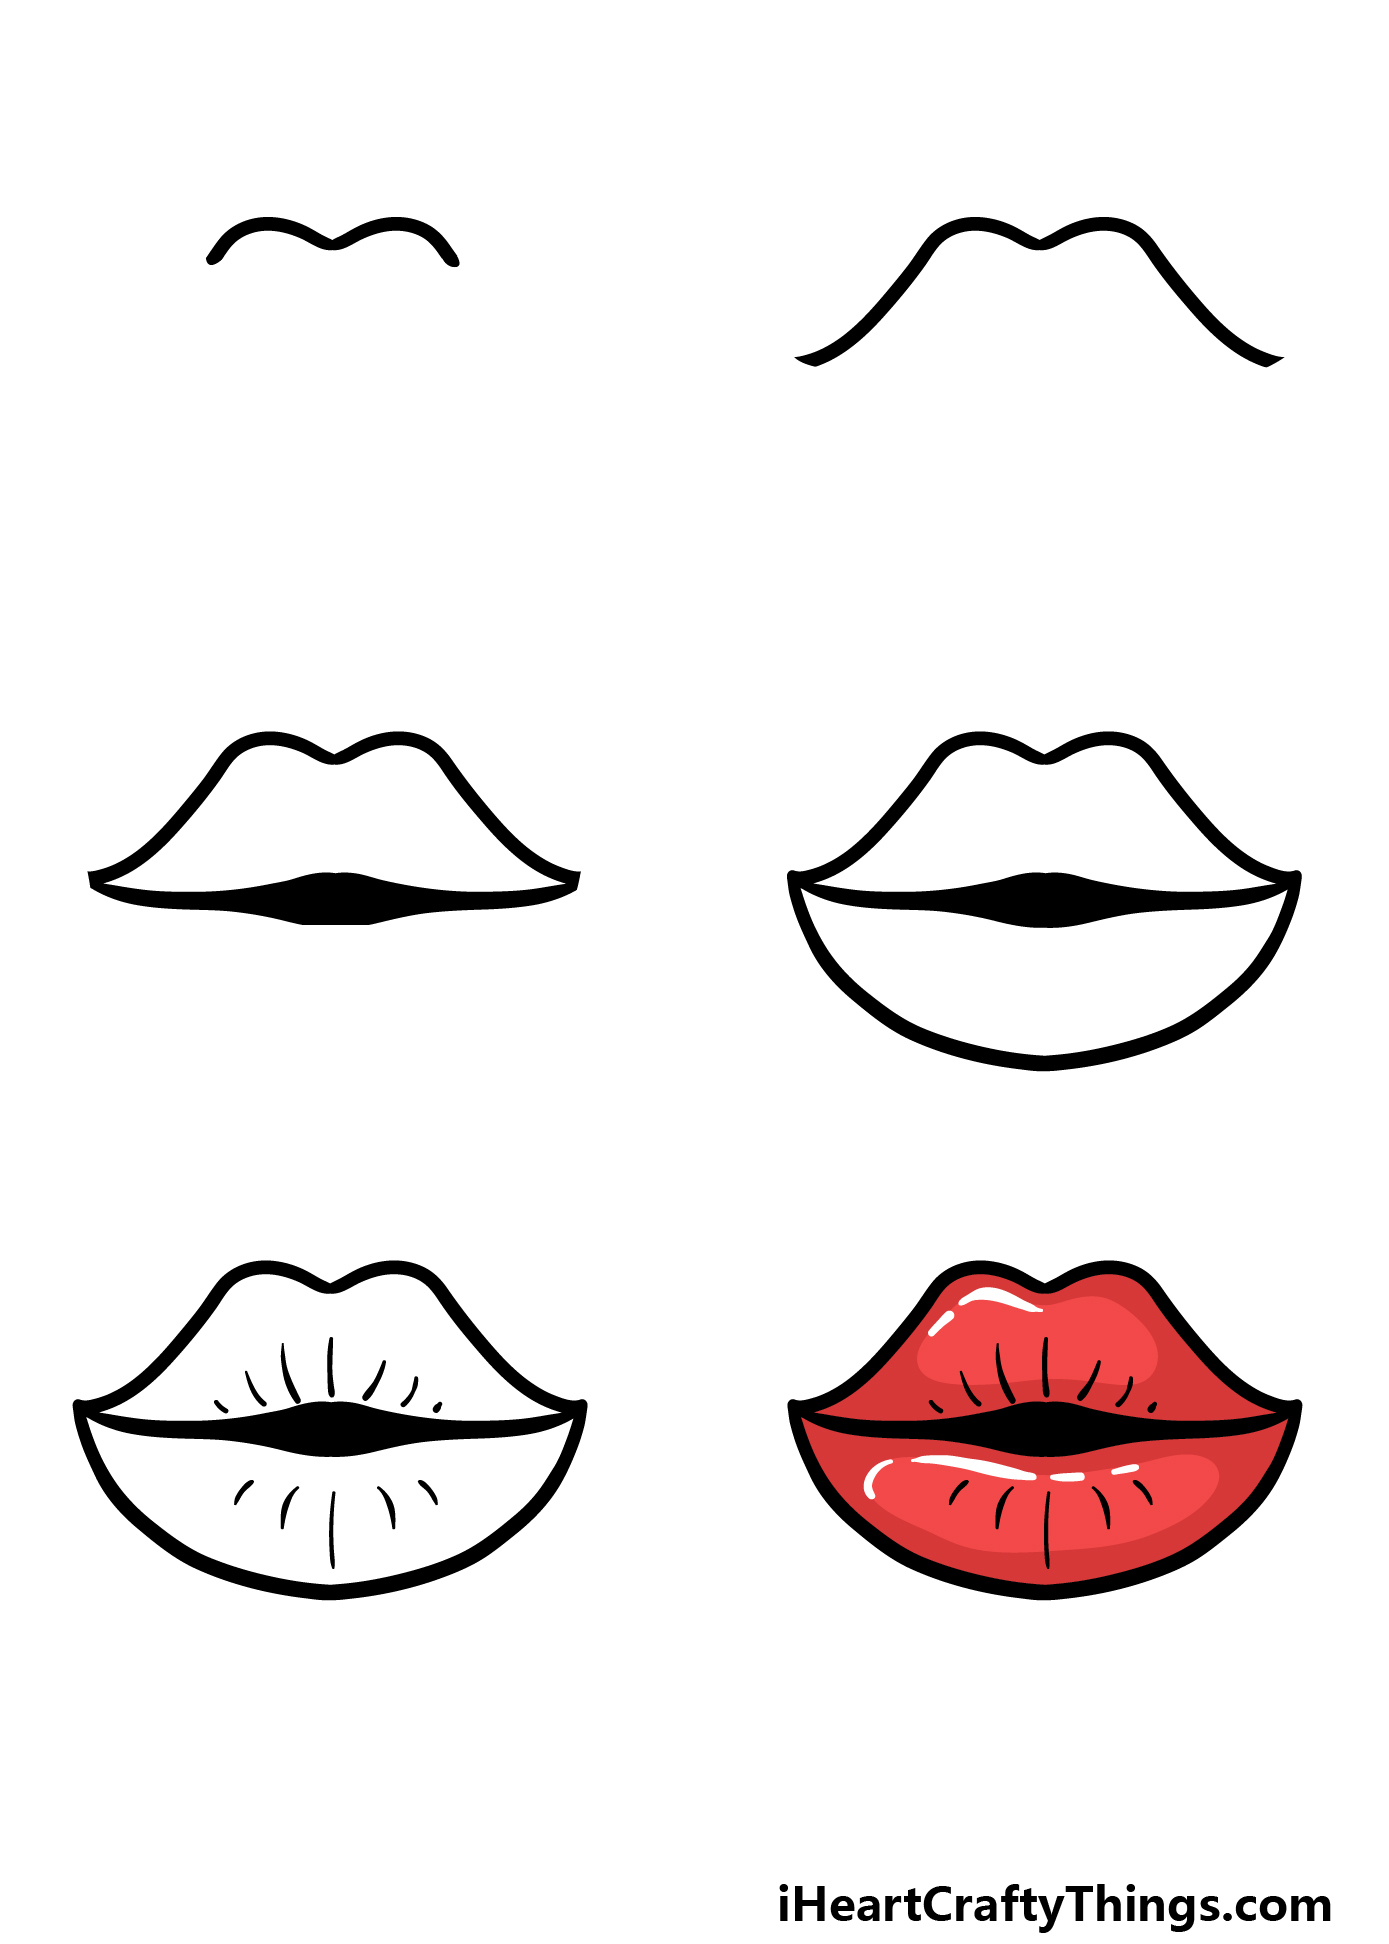 how to draw cartoon lips in 6 steps